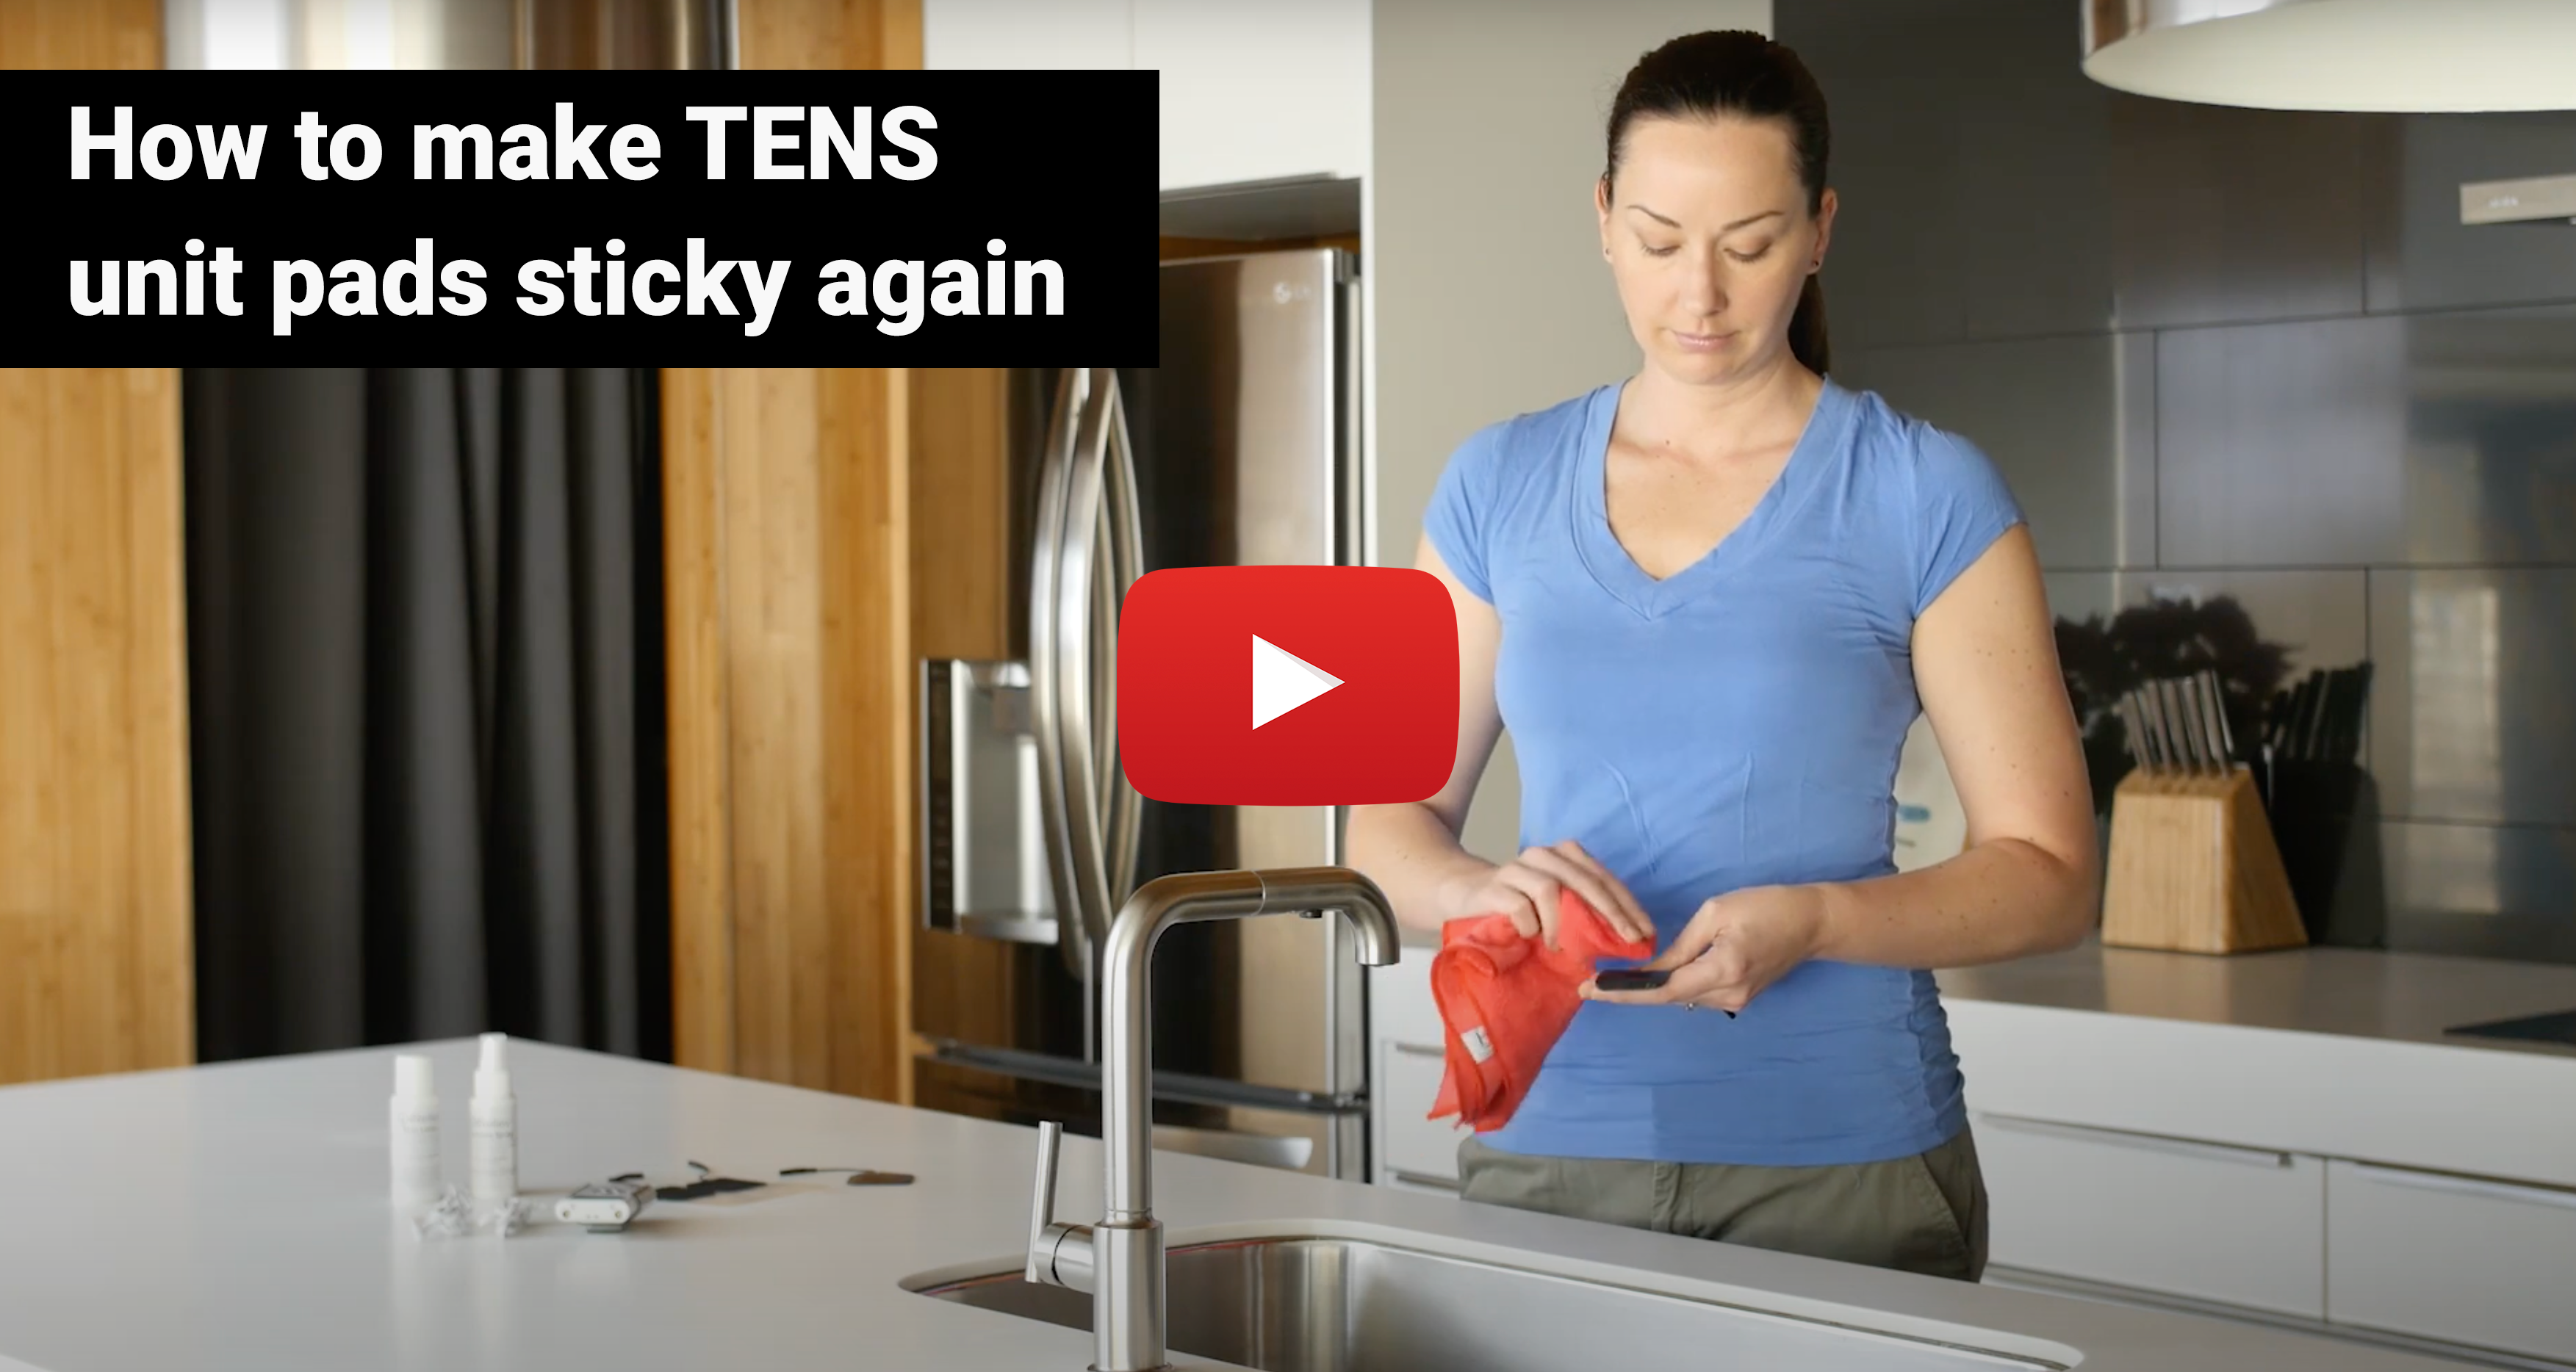 How to make tens unit pads sticky again